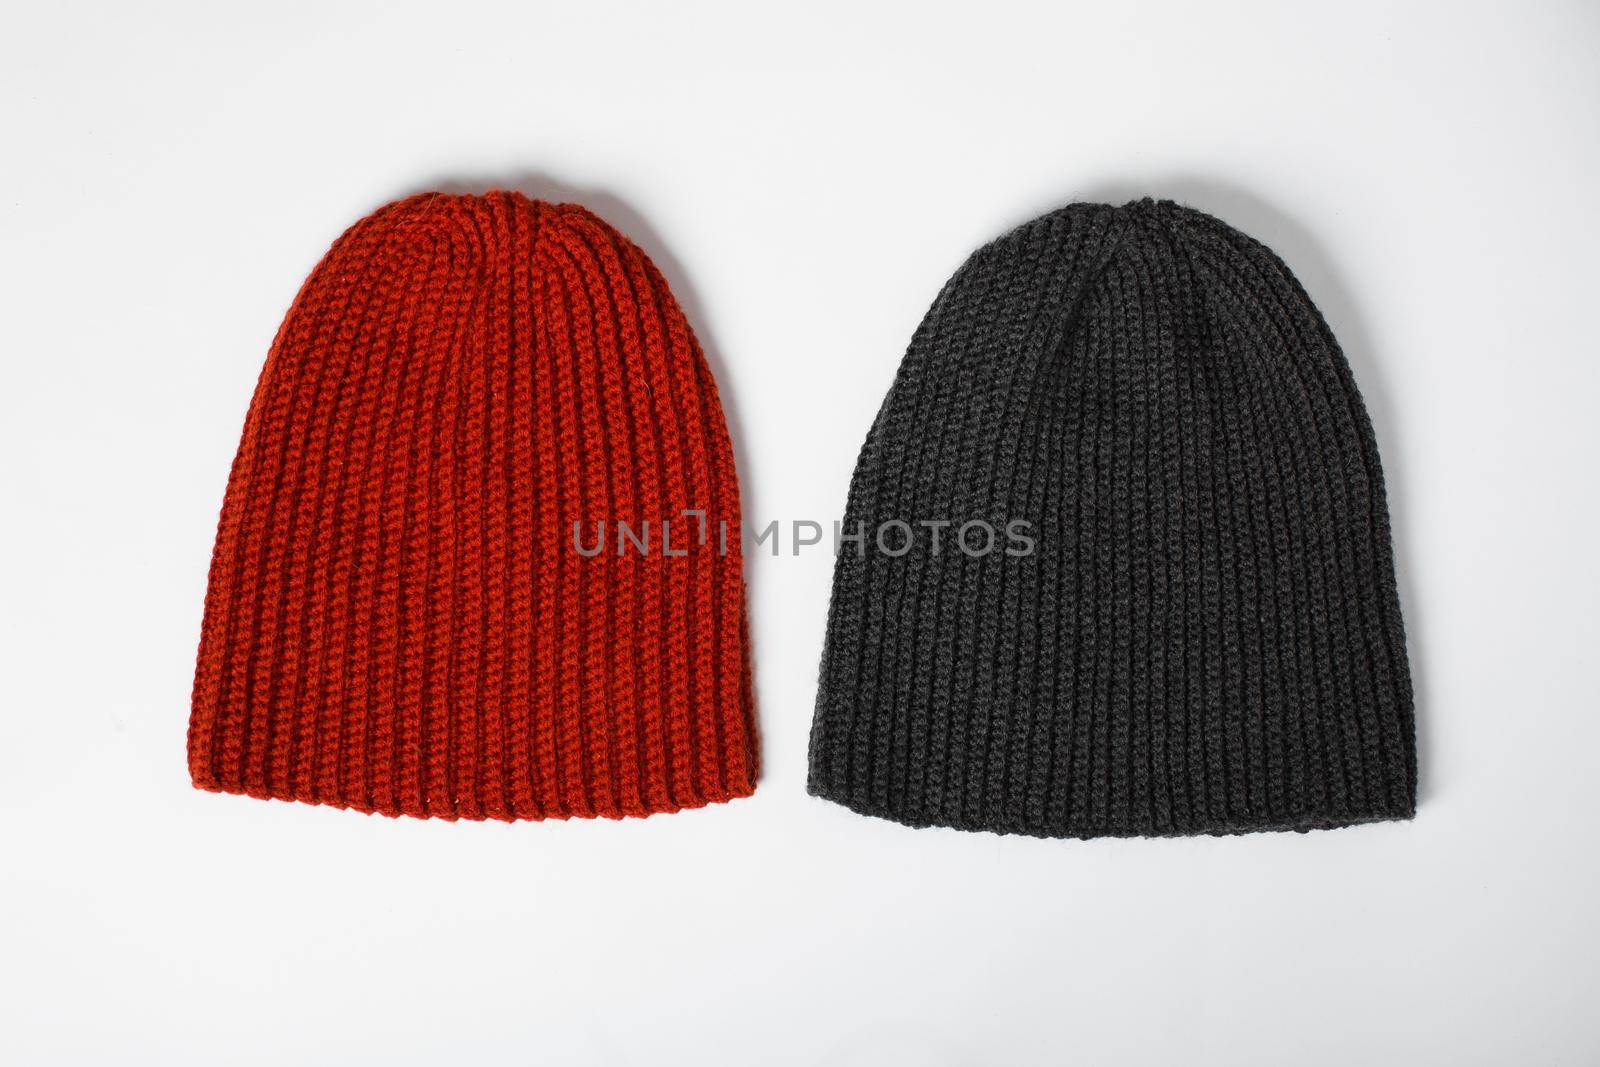 knitted hat in red and black on a white background by StudioPeace